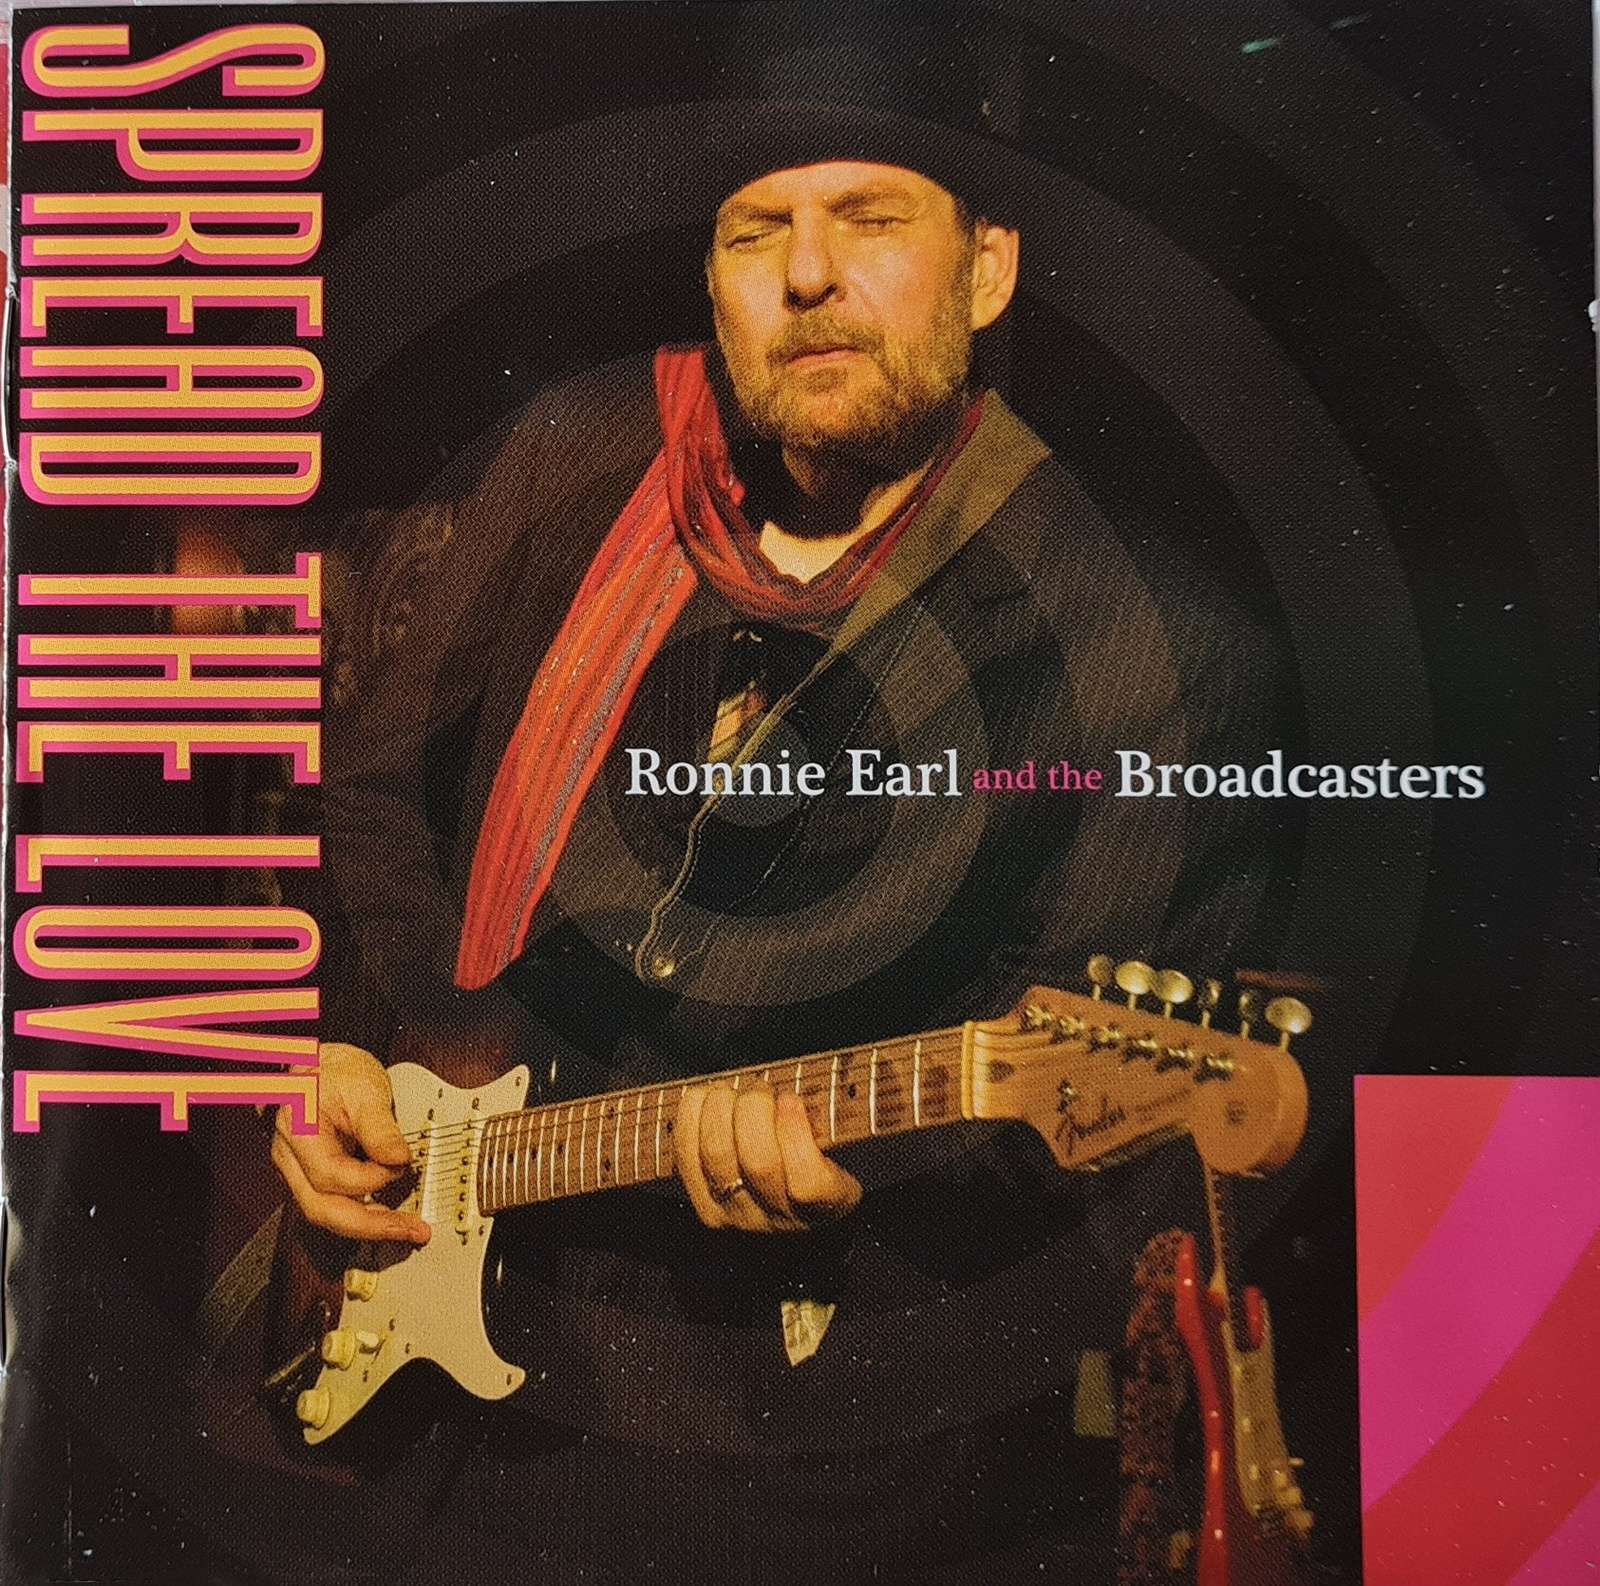 Ronnie Earl and the Broadcasters - Spread the Love (CD)